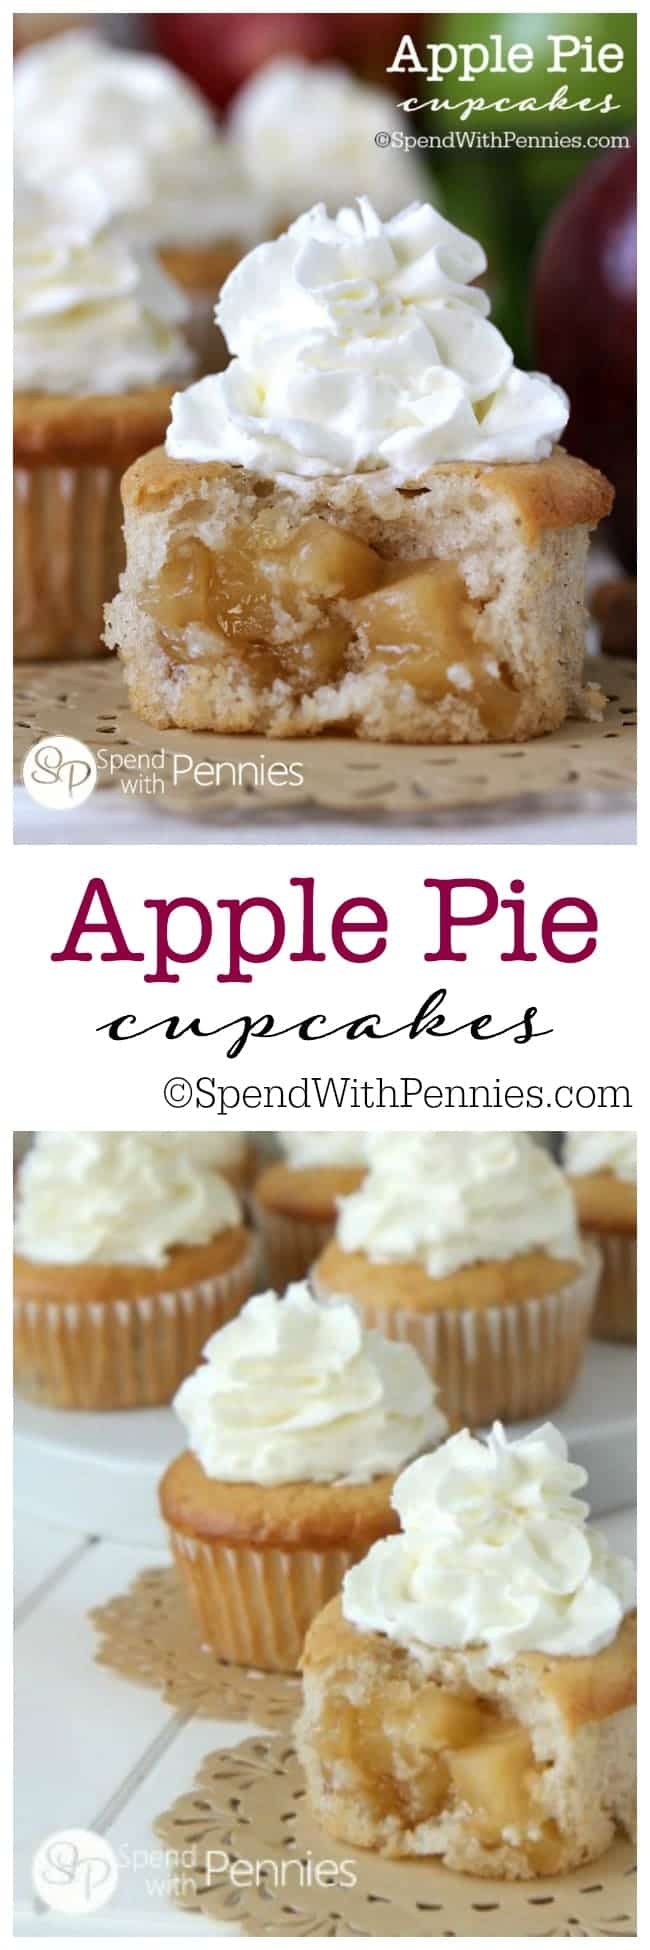 Apple Pie Cupcakes with Filling Recipe